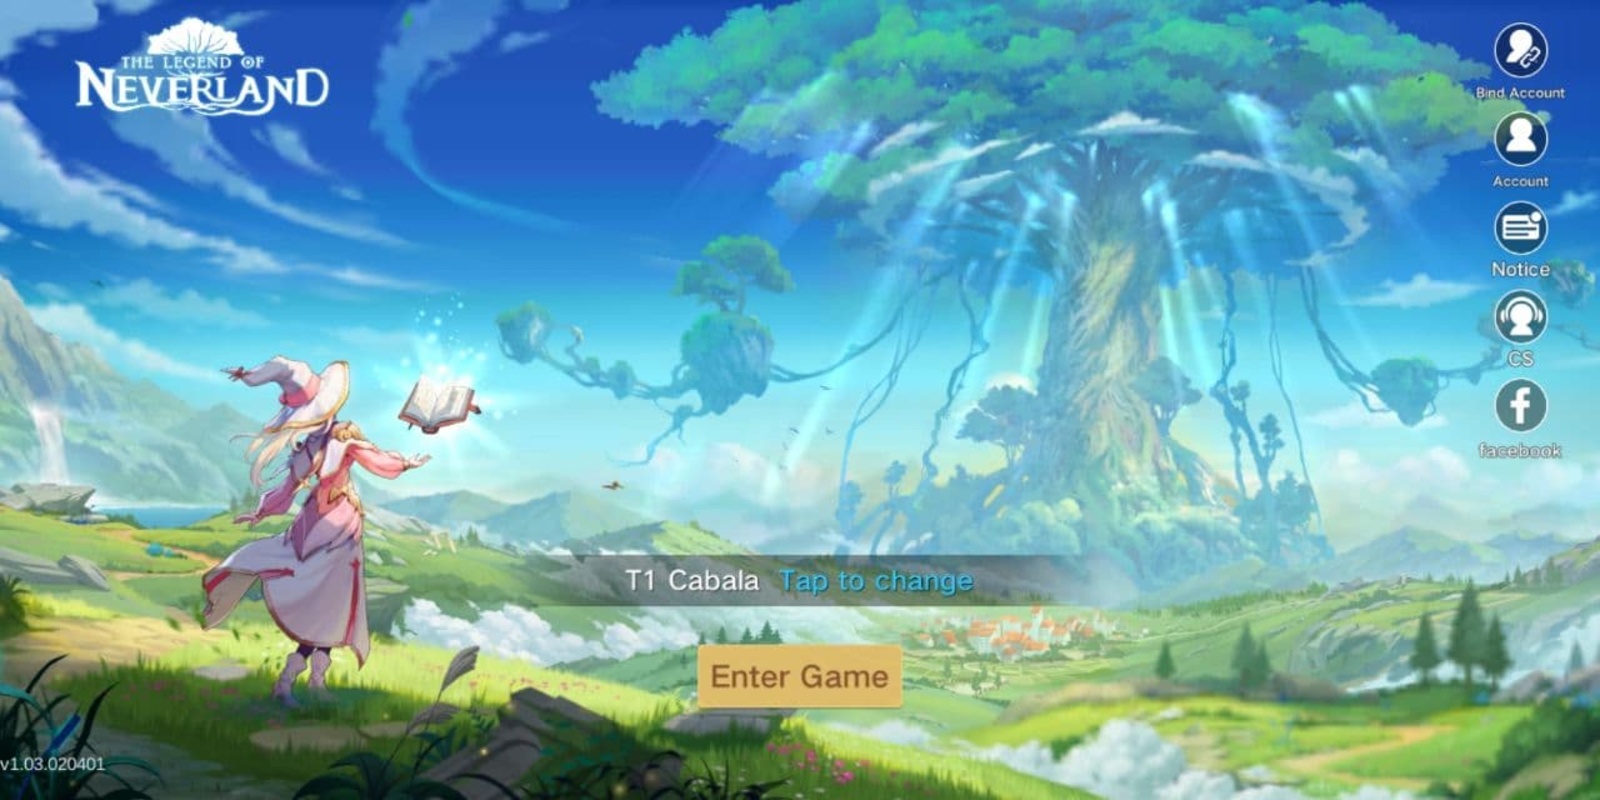 The Legend of Neverland (SEA) 1.16.23032412 APK for Android Screenshot 1